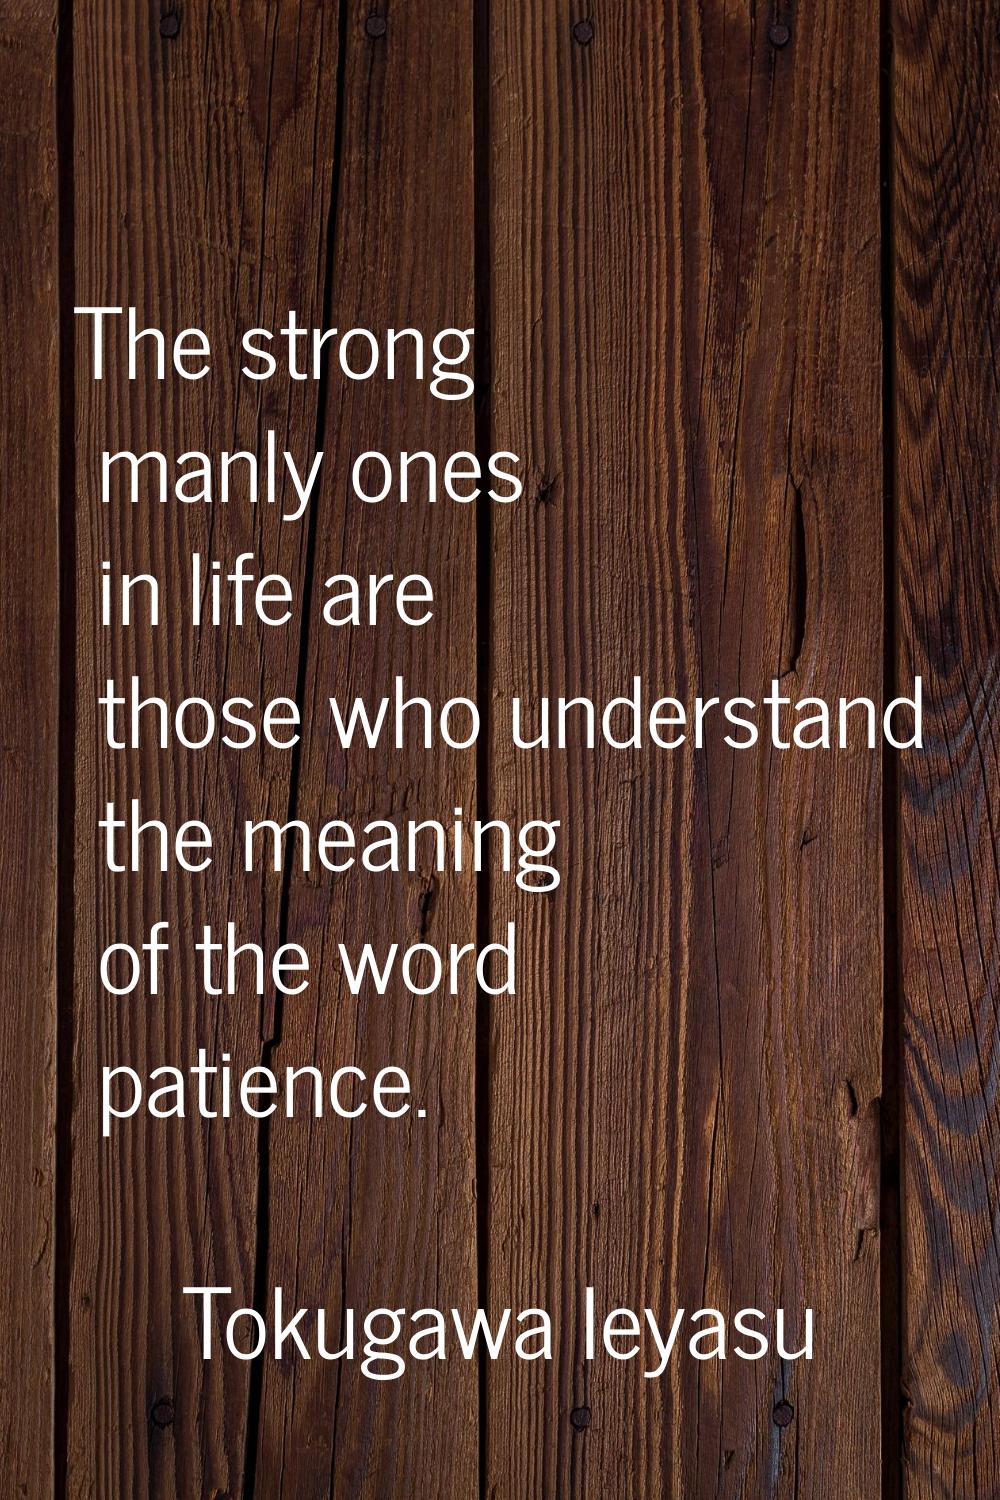 The strong manly ones in life are those who understand the meaning of the word patience.